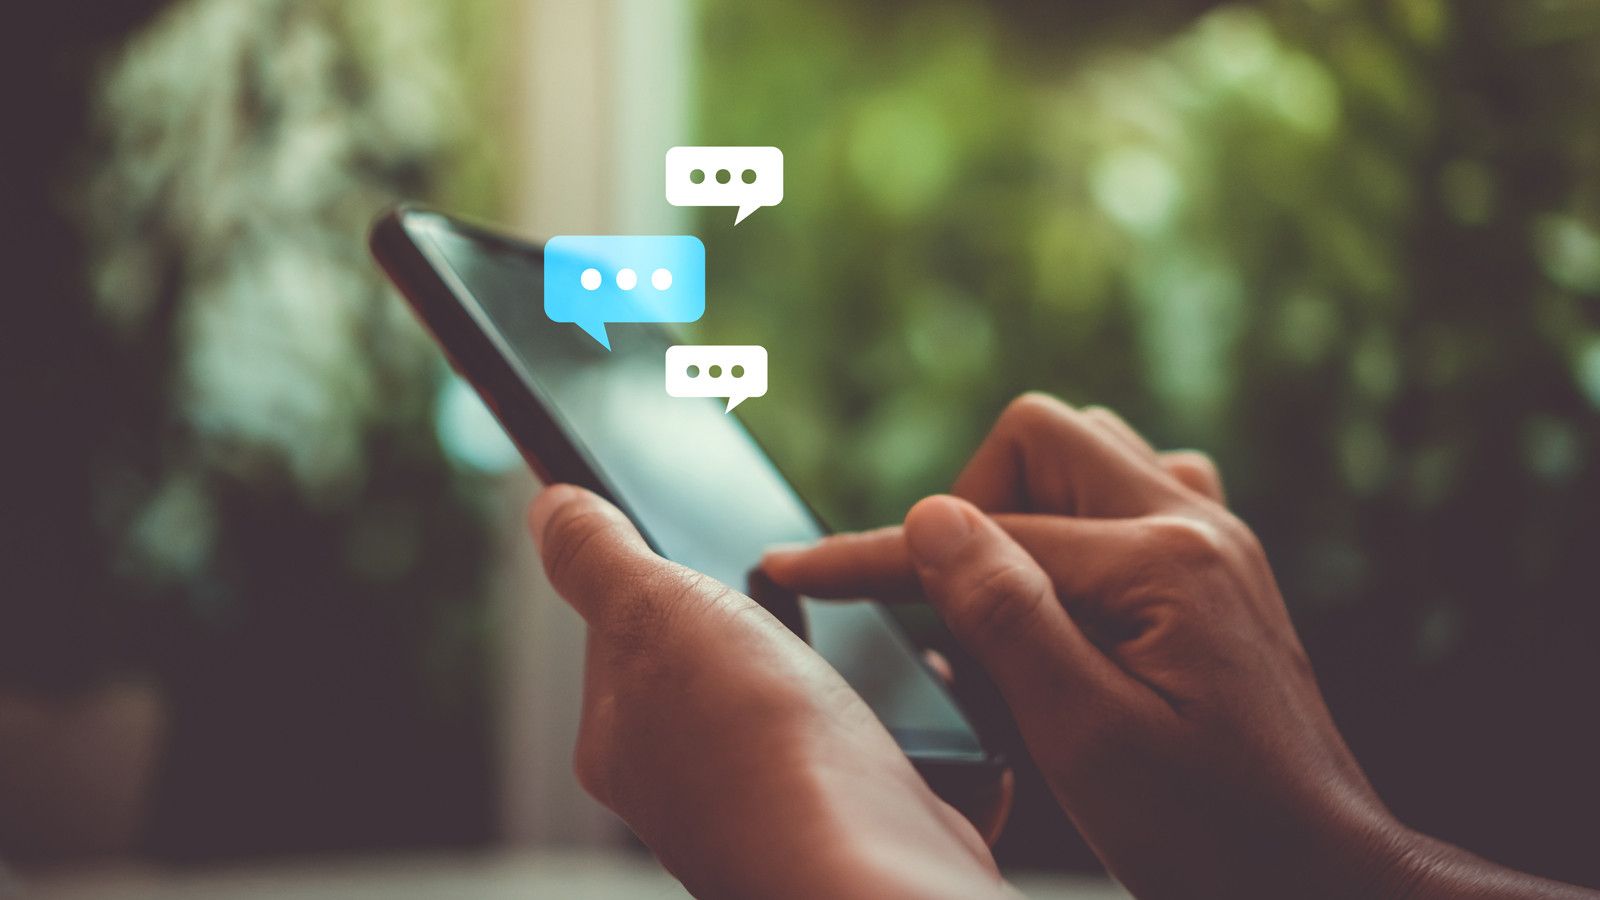 customer experience chatbot